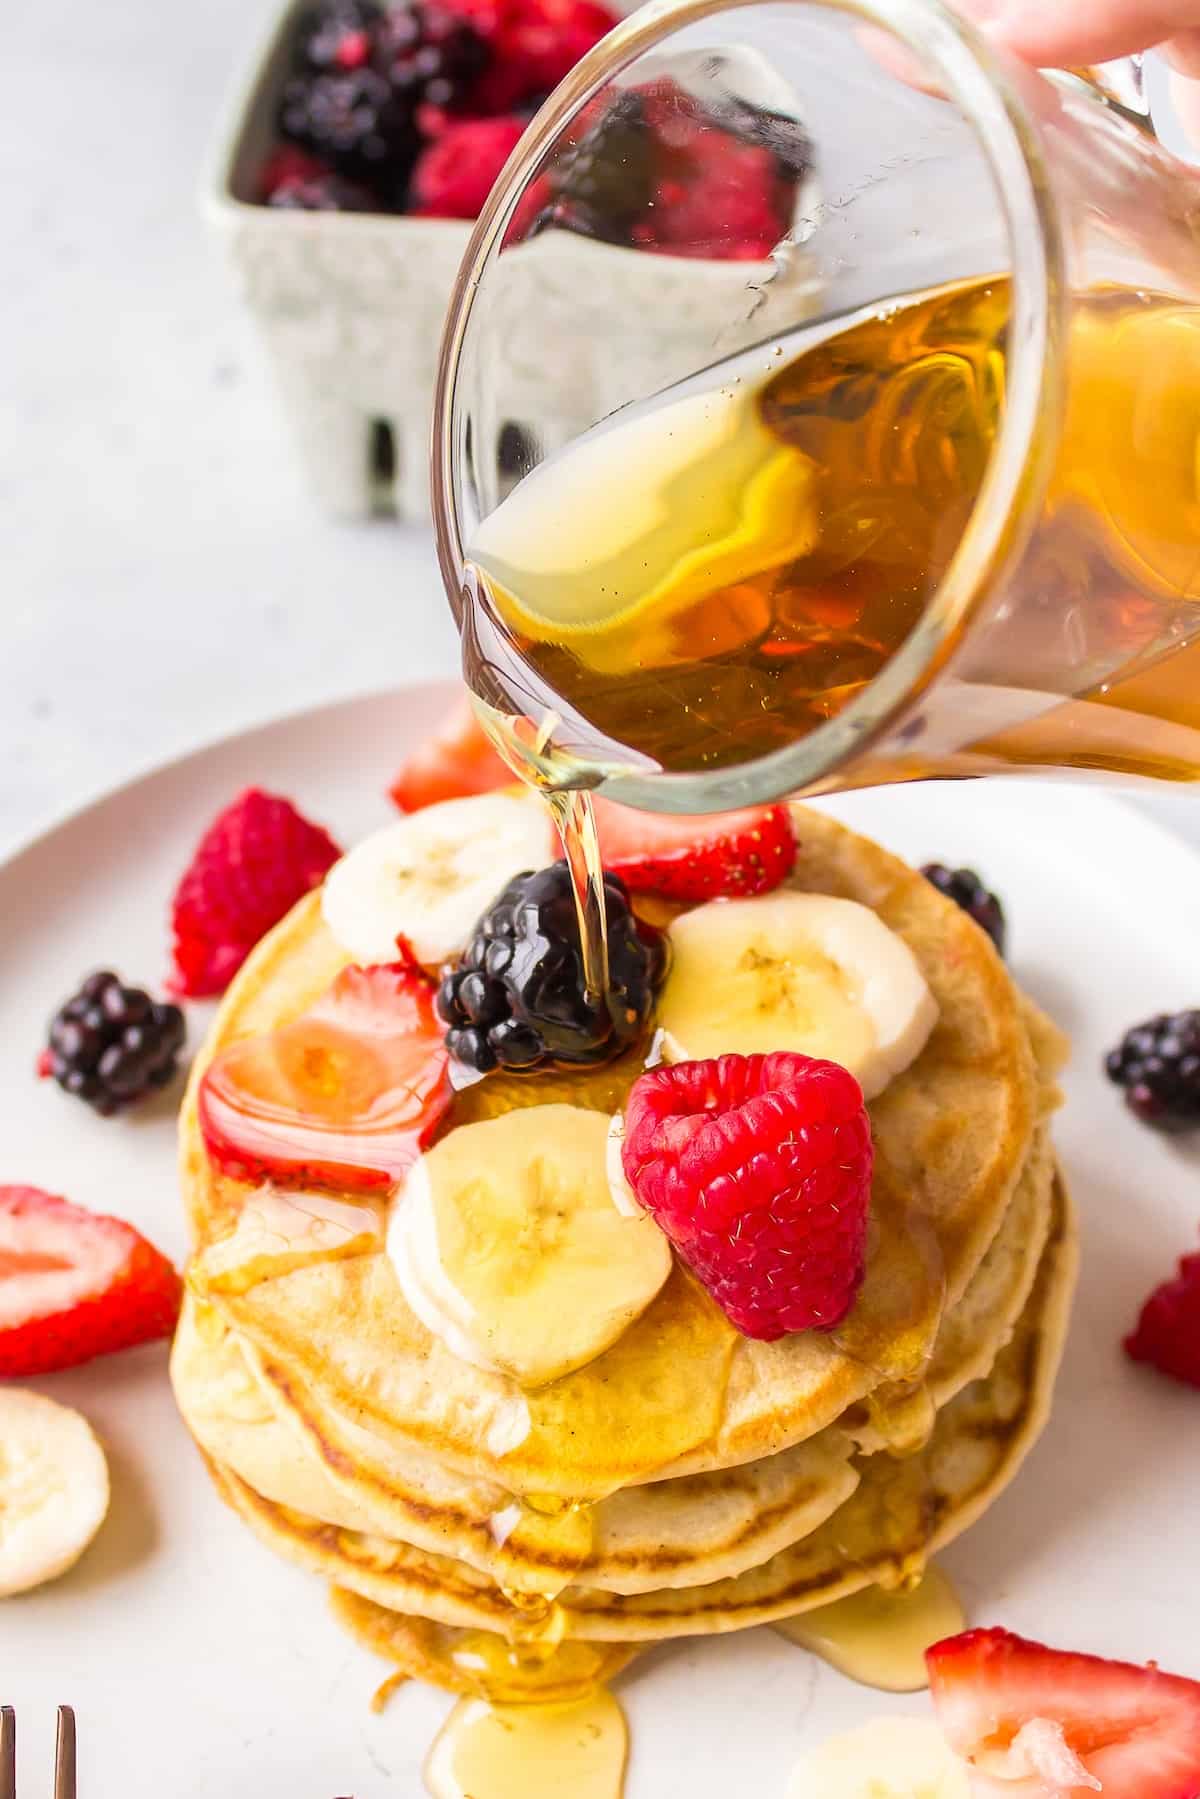 syrup being poured over a stack of pancakes topped with fruit.